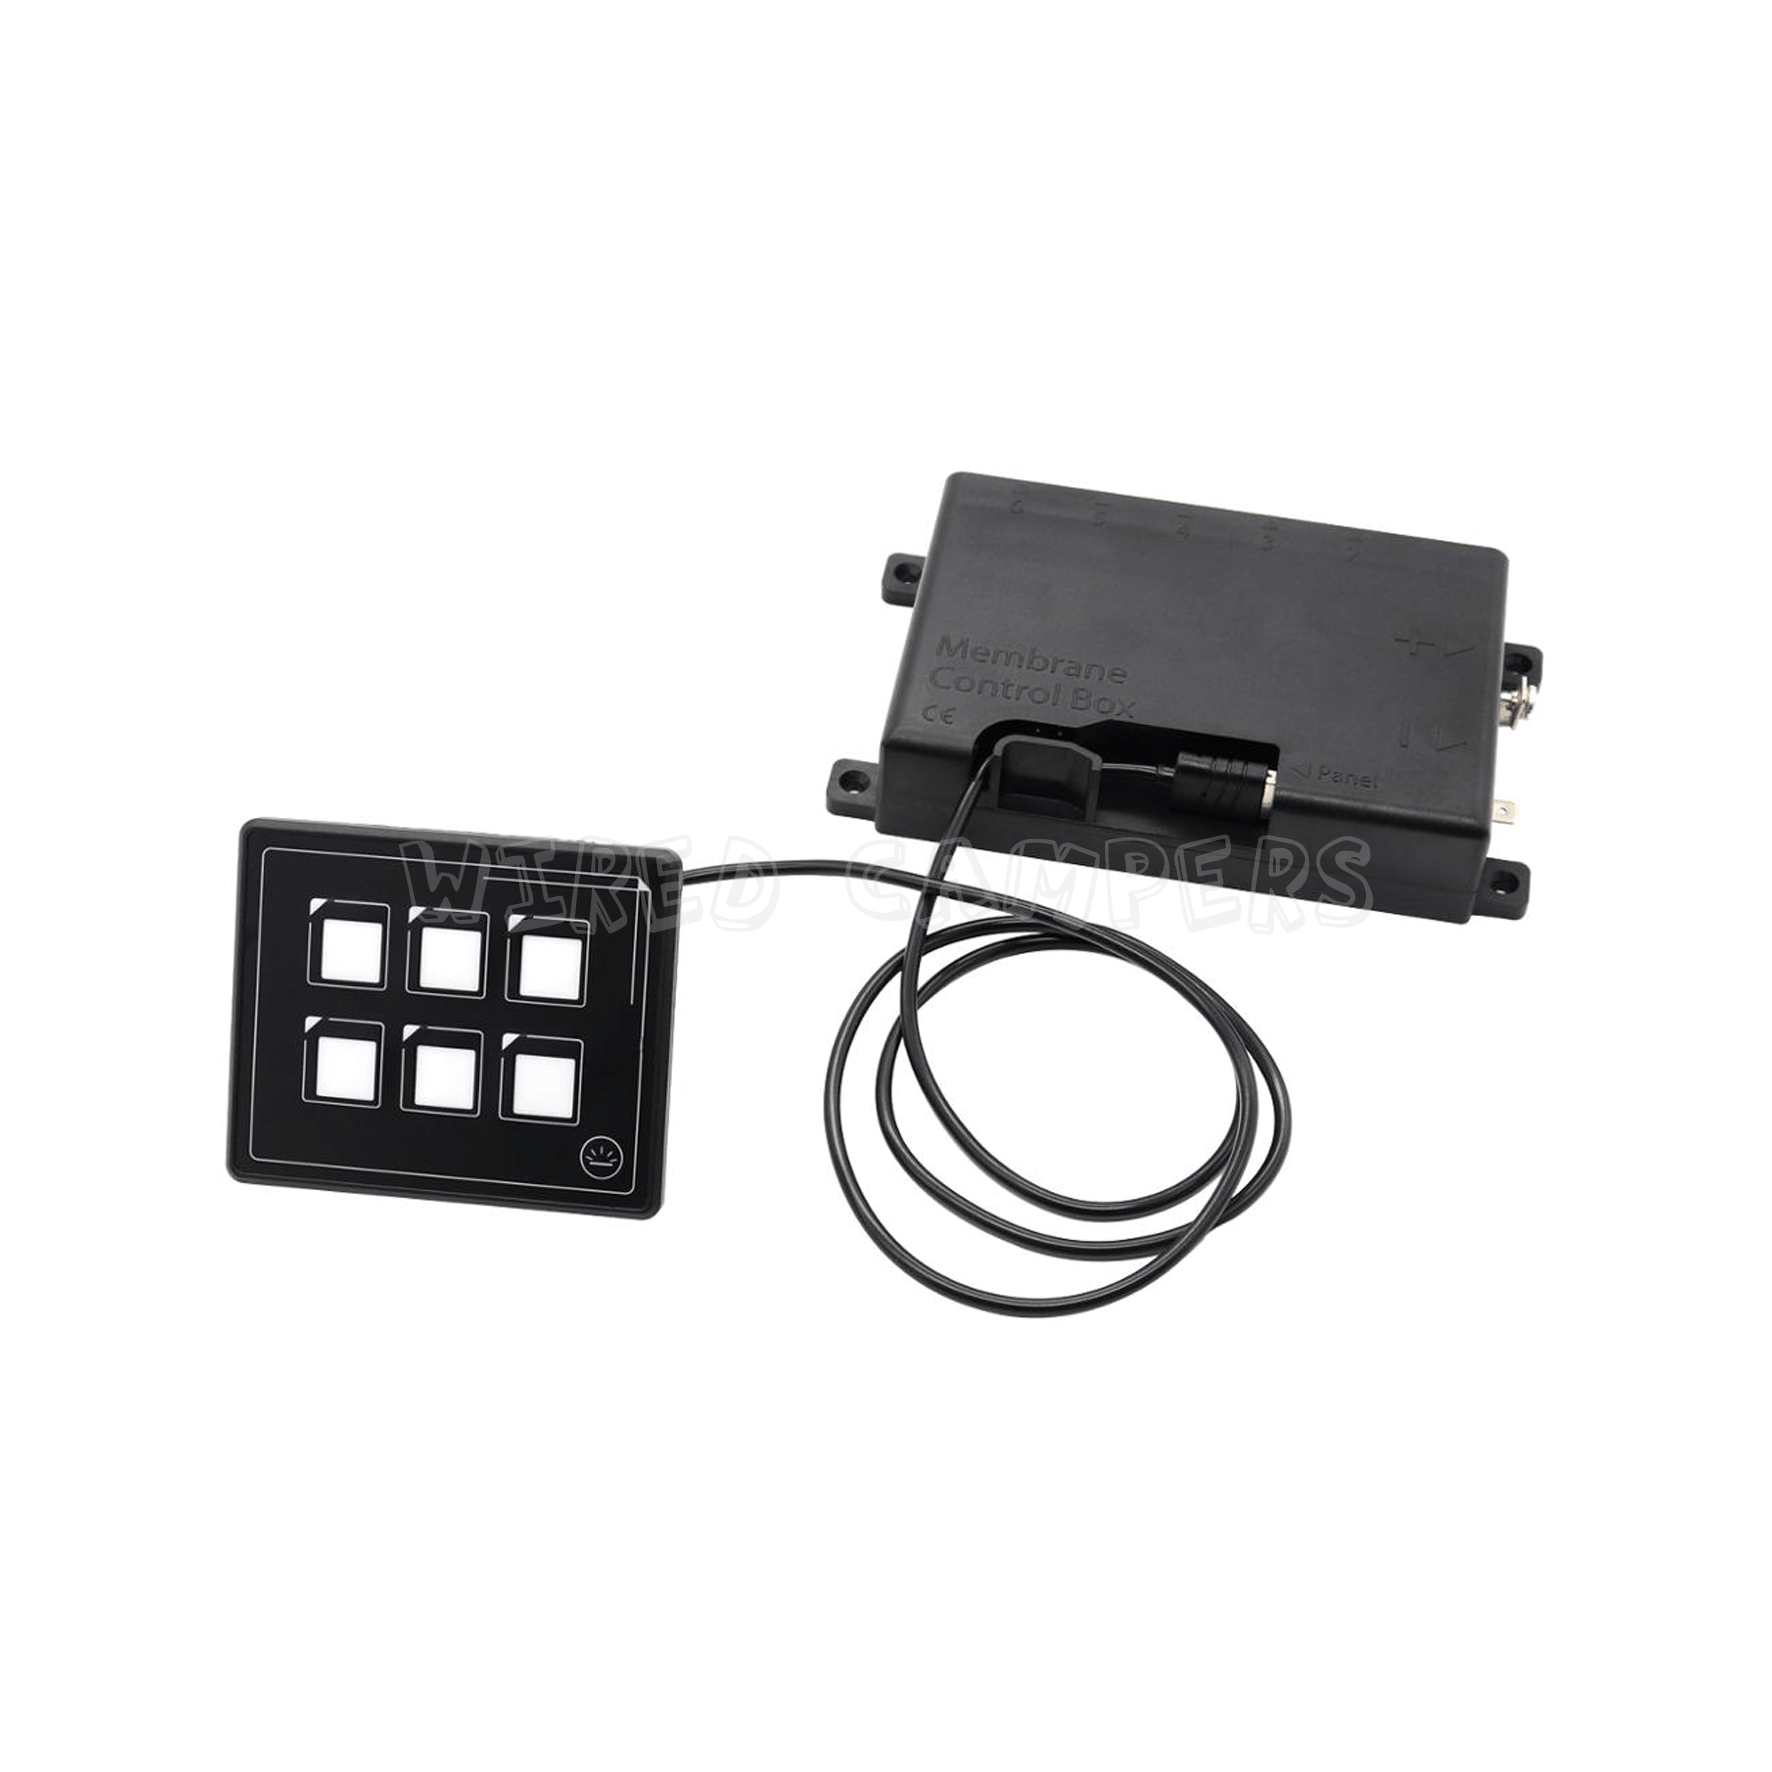 Wired Campers Membrane Control Panel 12V 6 Way Camper Van Light Up Membrane Touch Panel & Control Box